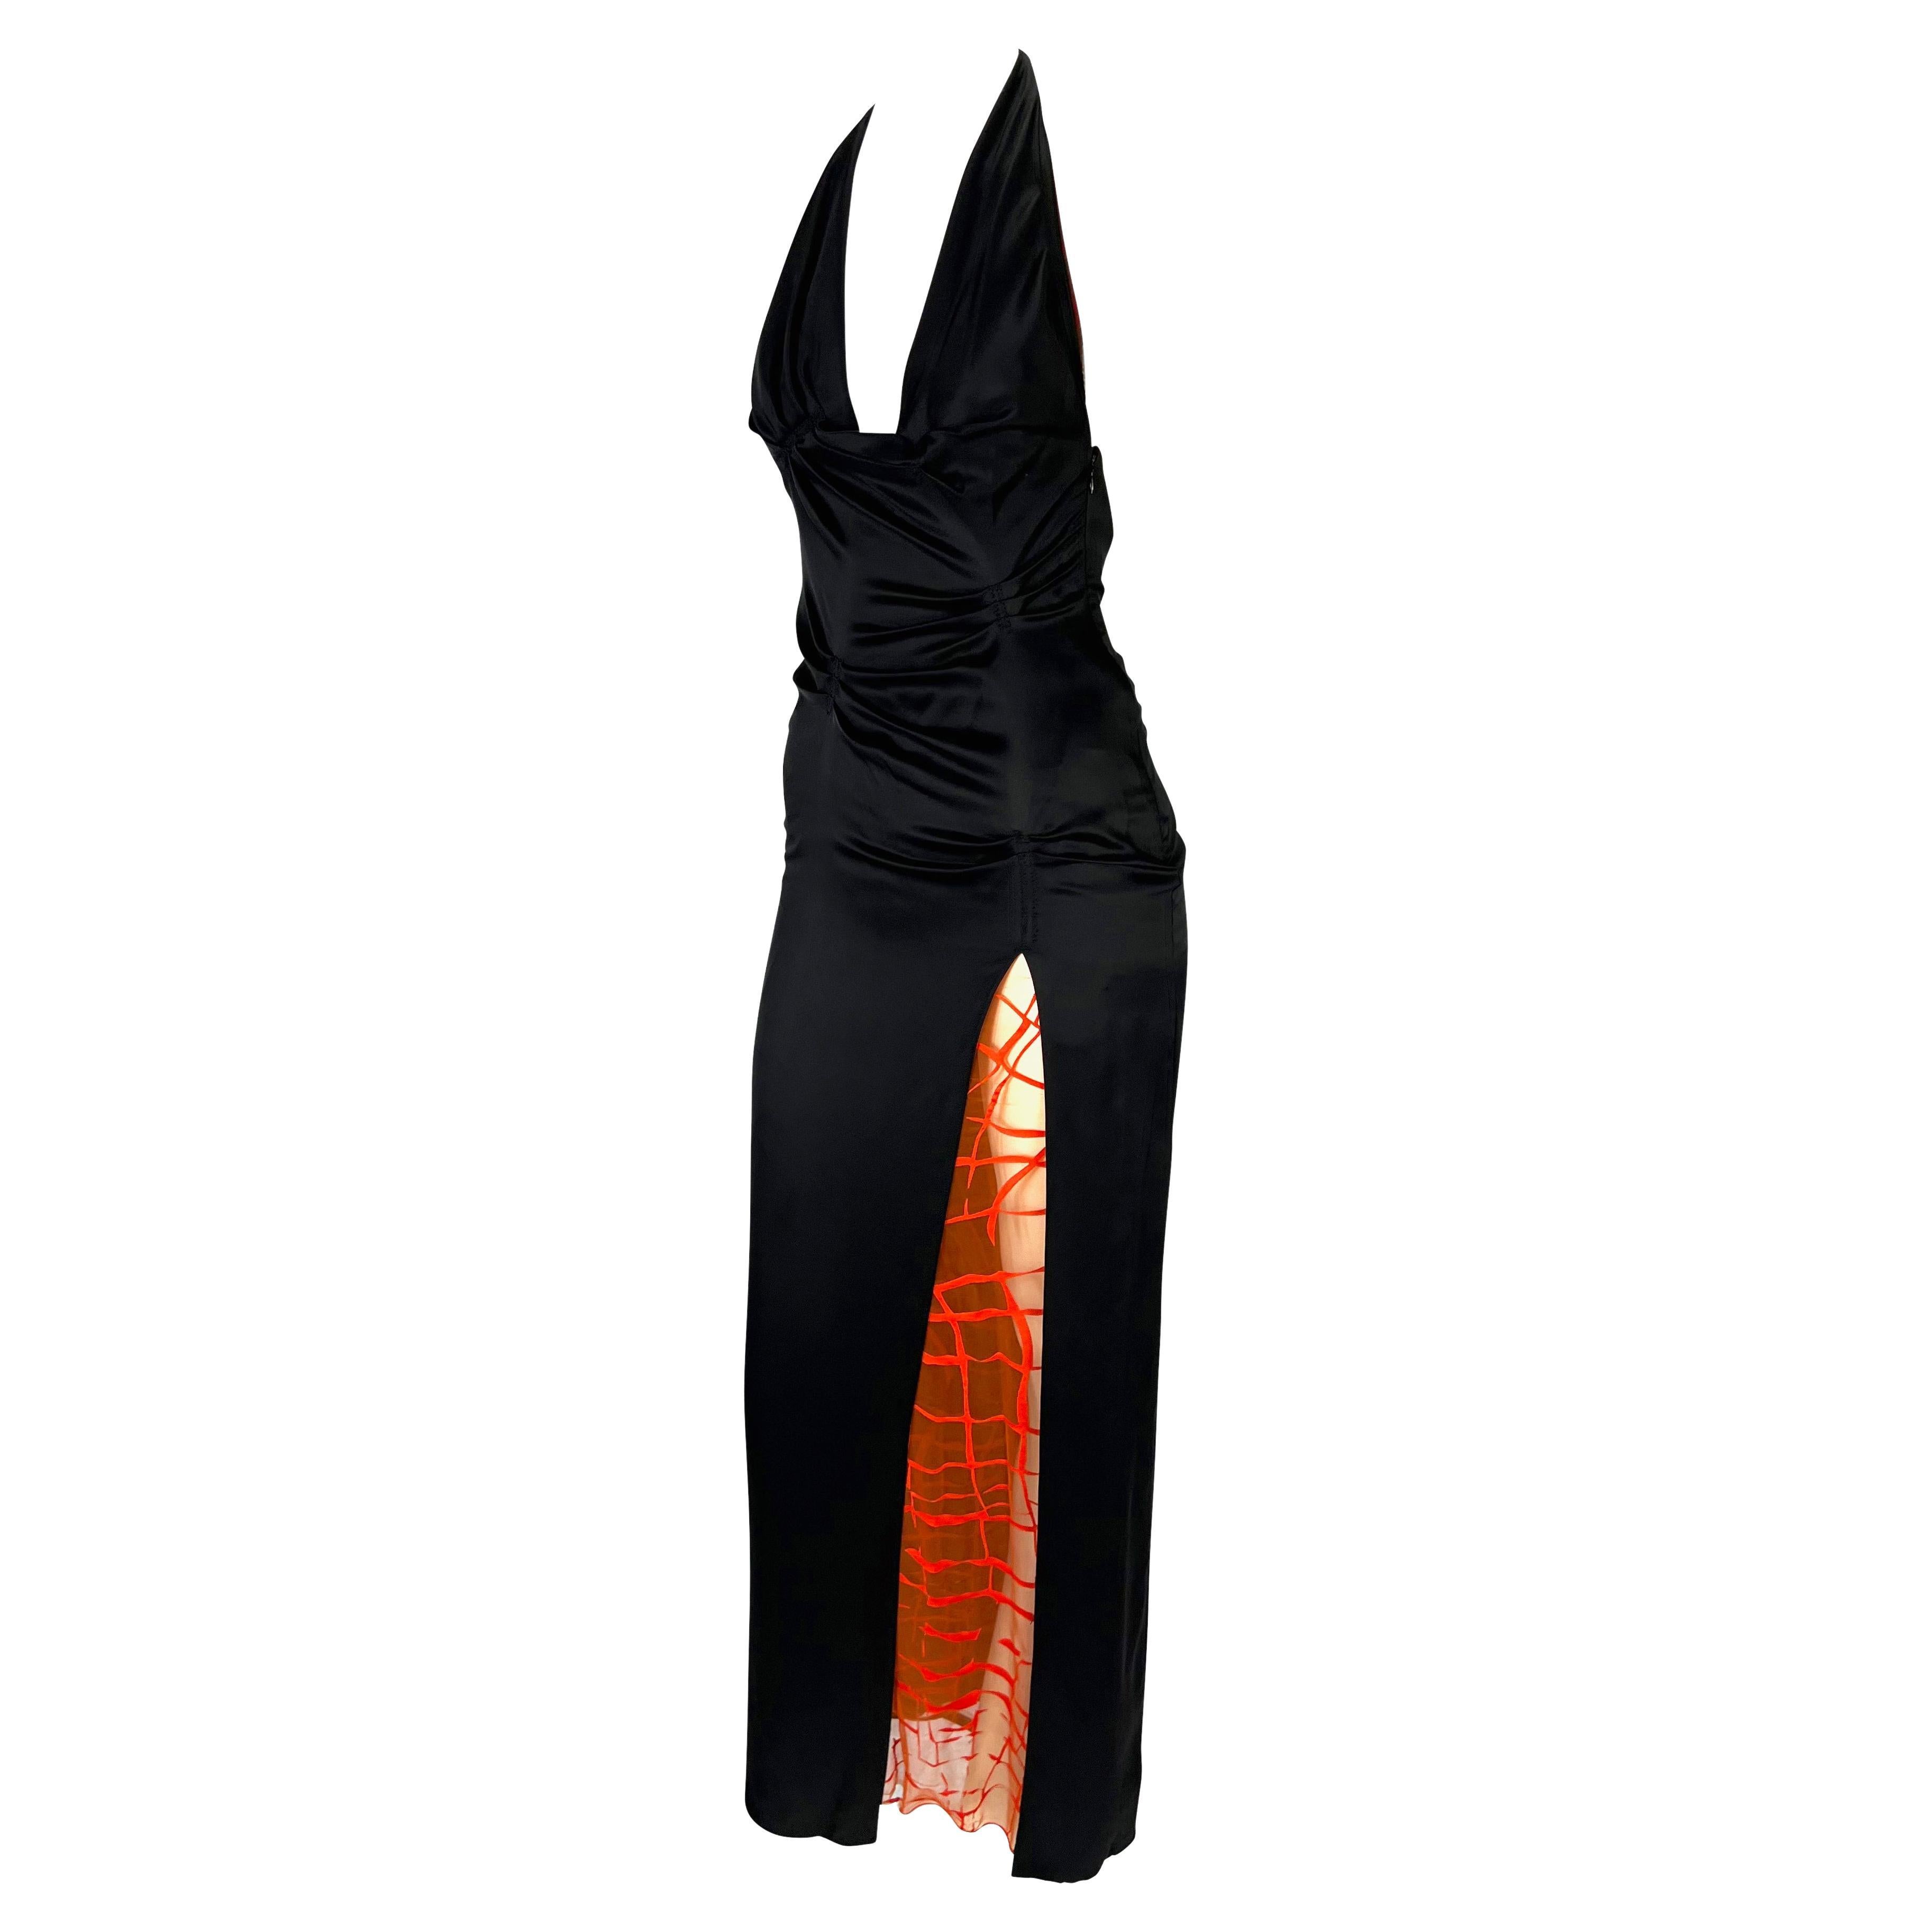 Presenting a stunning black and orange Gianni Versace halterneck gown, designed by Donatella Versace. From the Spring/Summer 1999 collection, this beautiful dress features ruching throughout the torso, a halterneck, an exposed back, and an angular